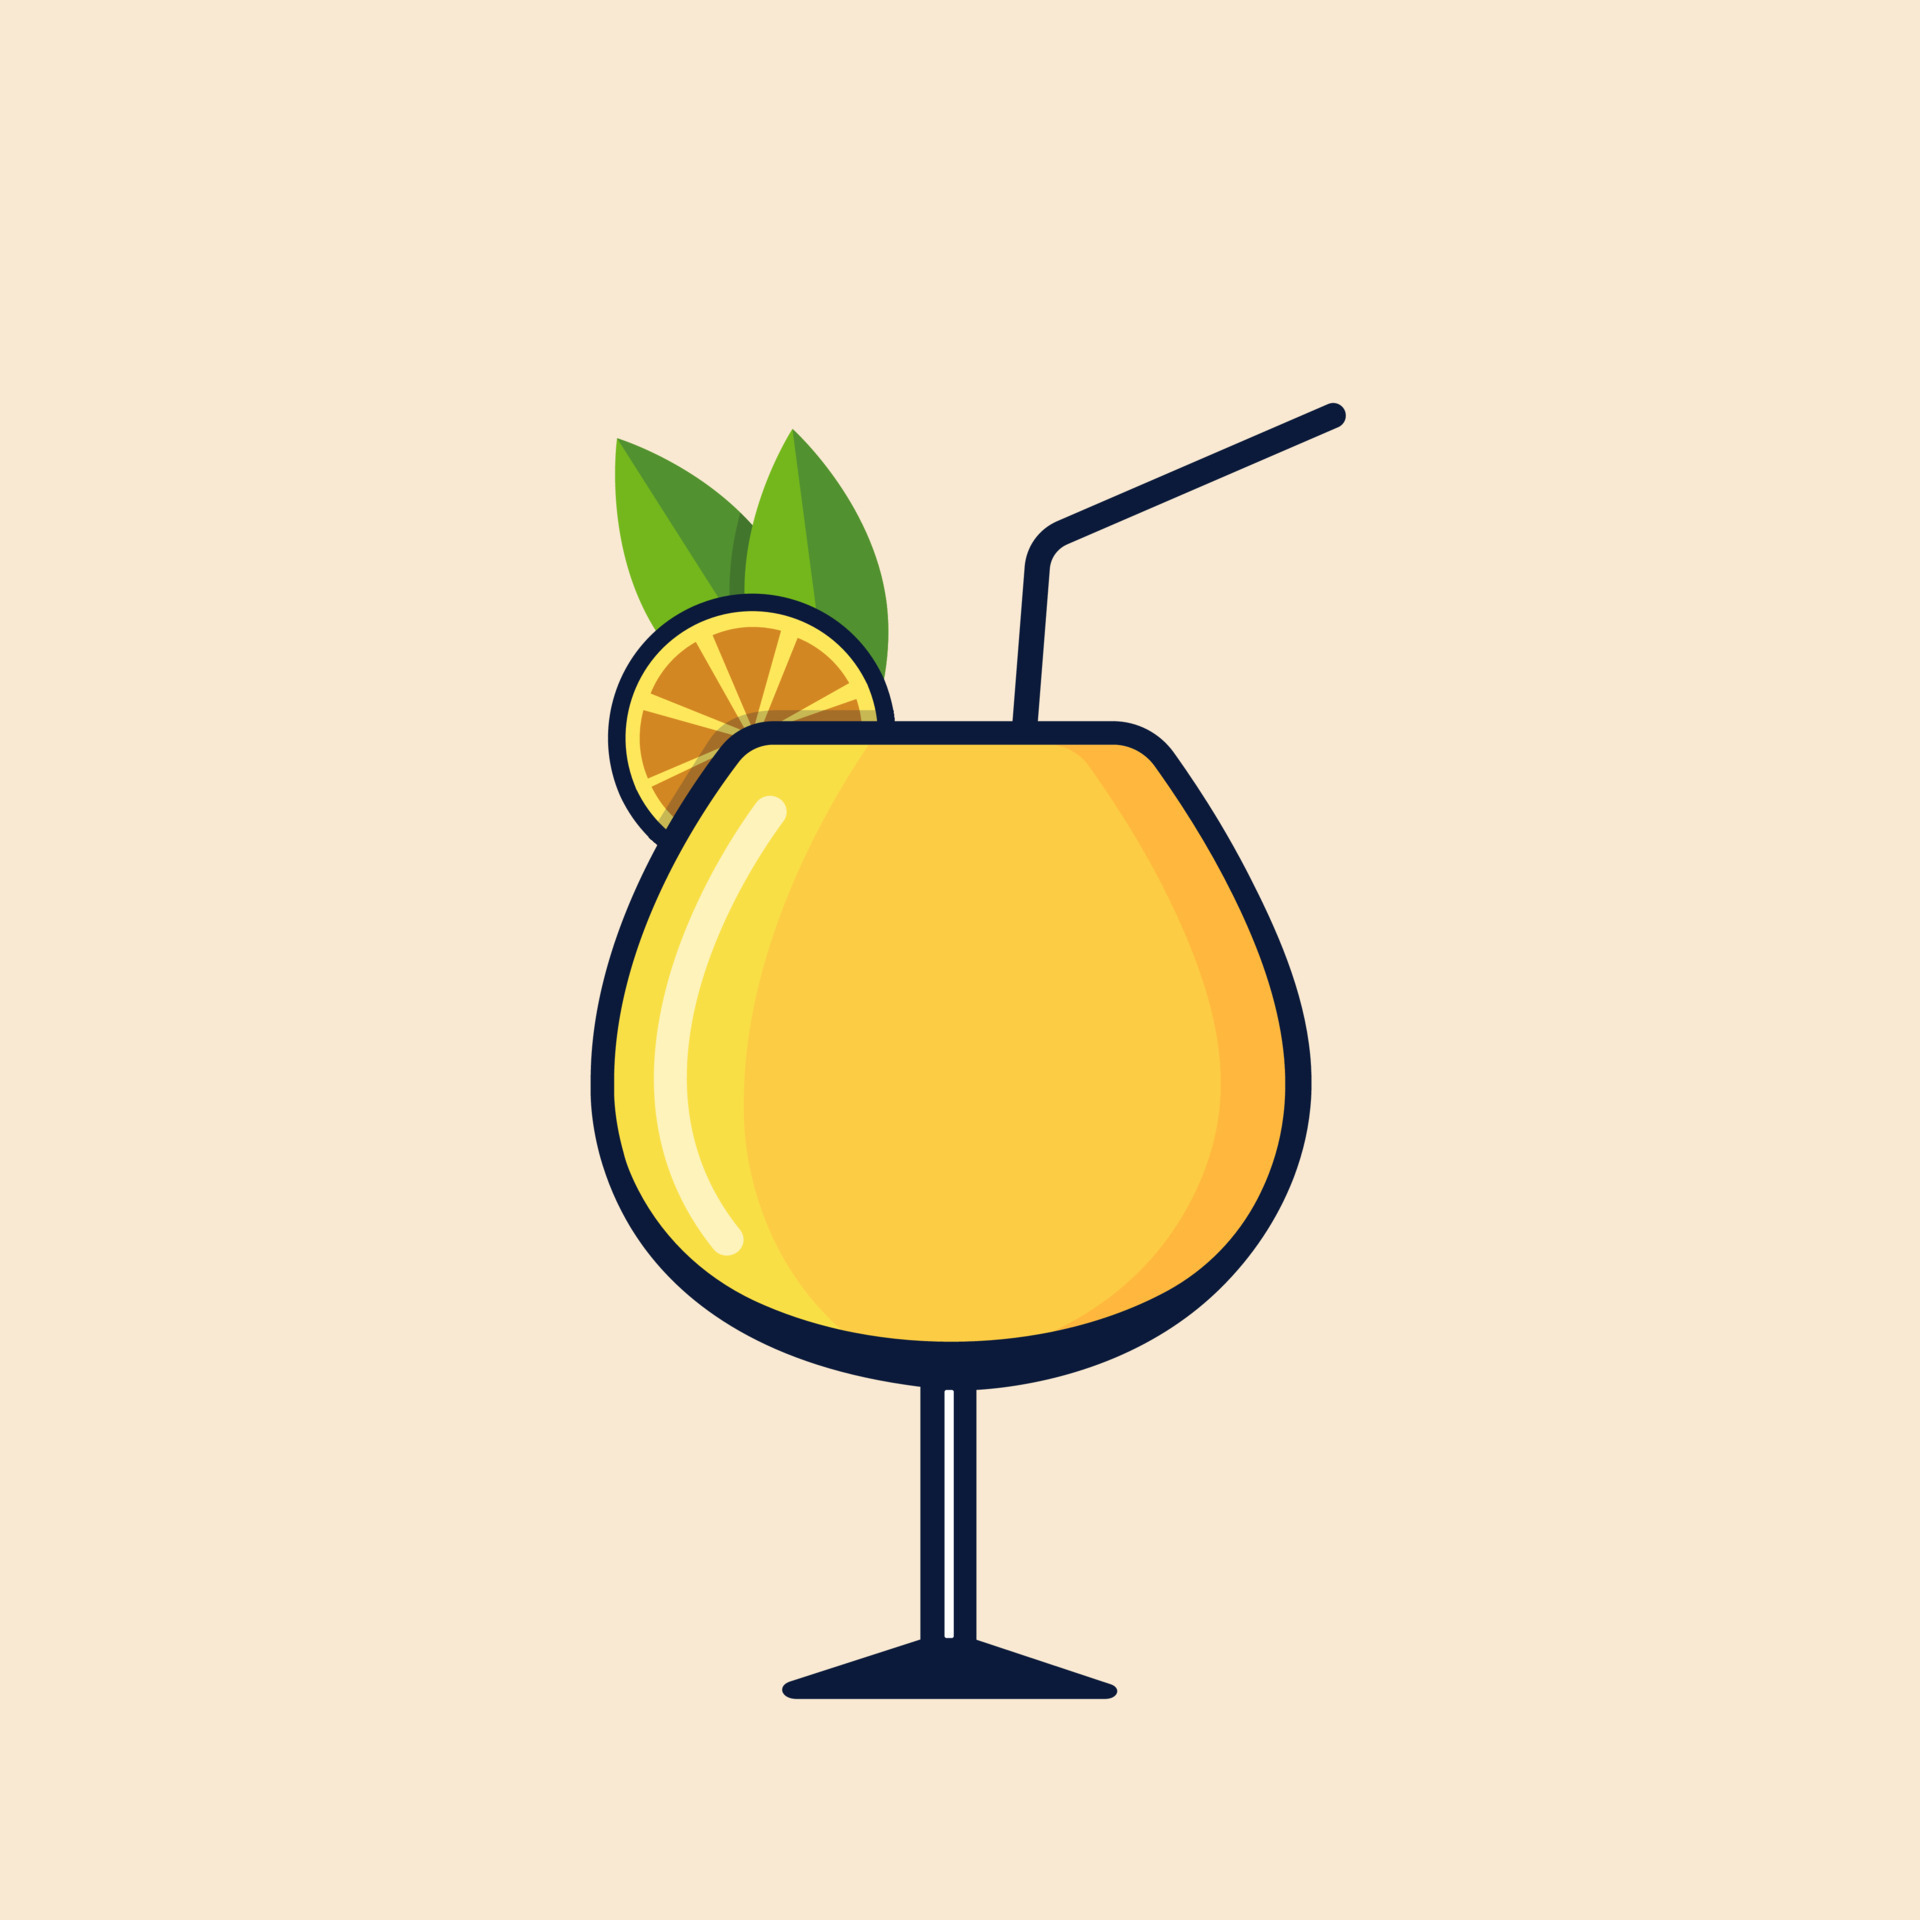 https://static.vecteezy.com/system/resources/previews/021/919/719/original/creative-mimosa-illustrations-drink-glass-illustrations-isolated-alcohol-cafe-bar-ice-art-juice-party-brunch-champagne-restaurant-wineglass-elements-icon-free-vector.jpg